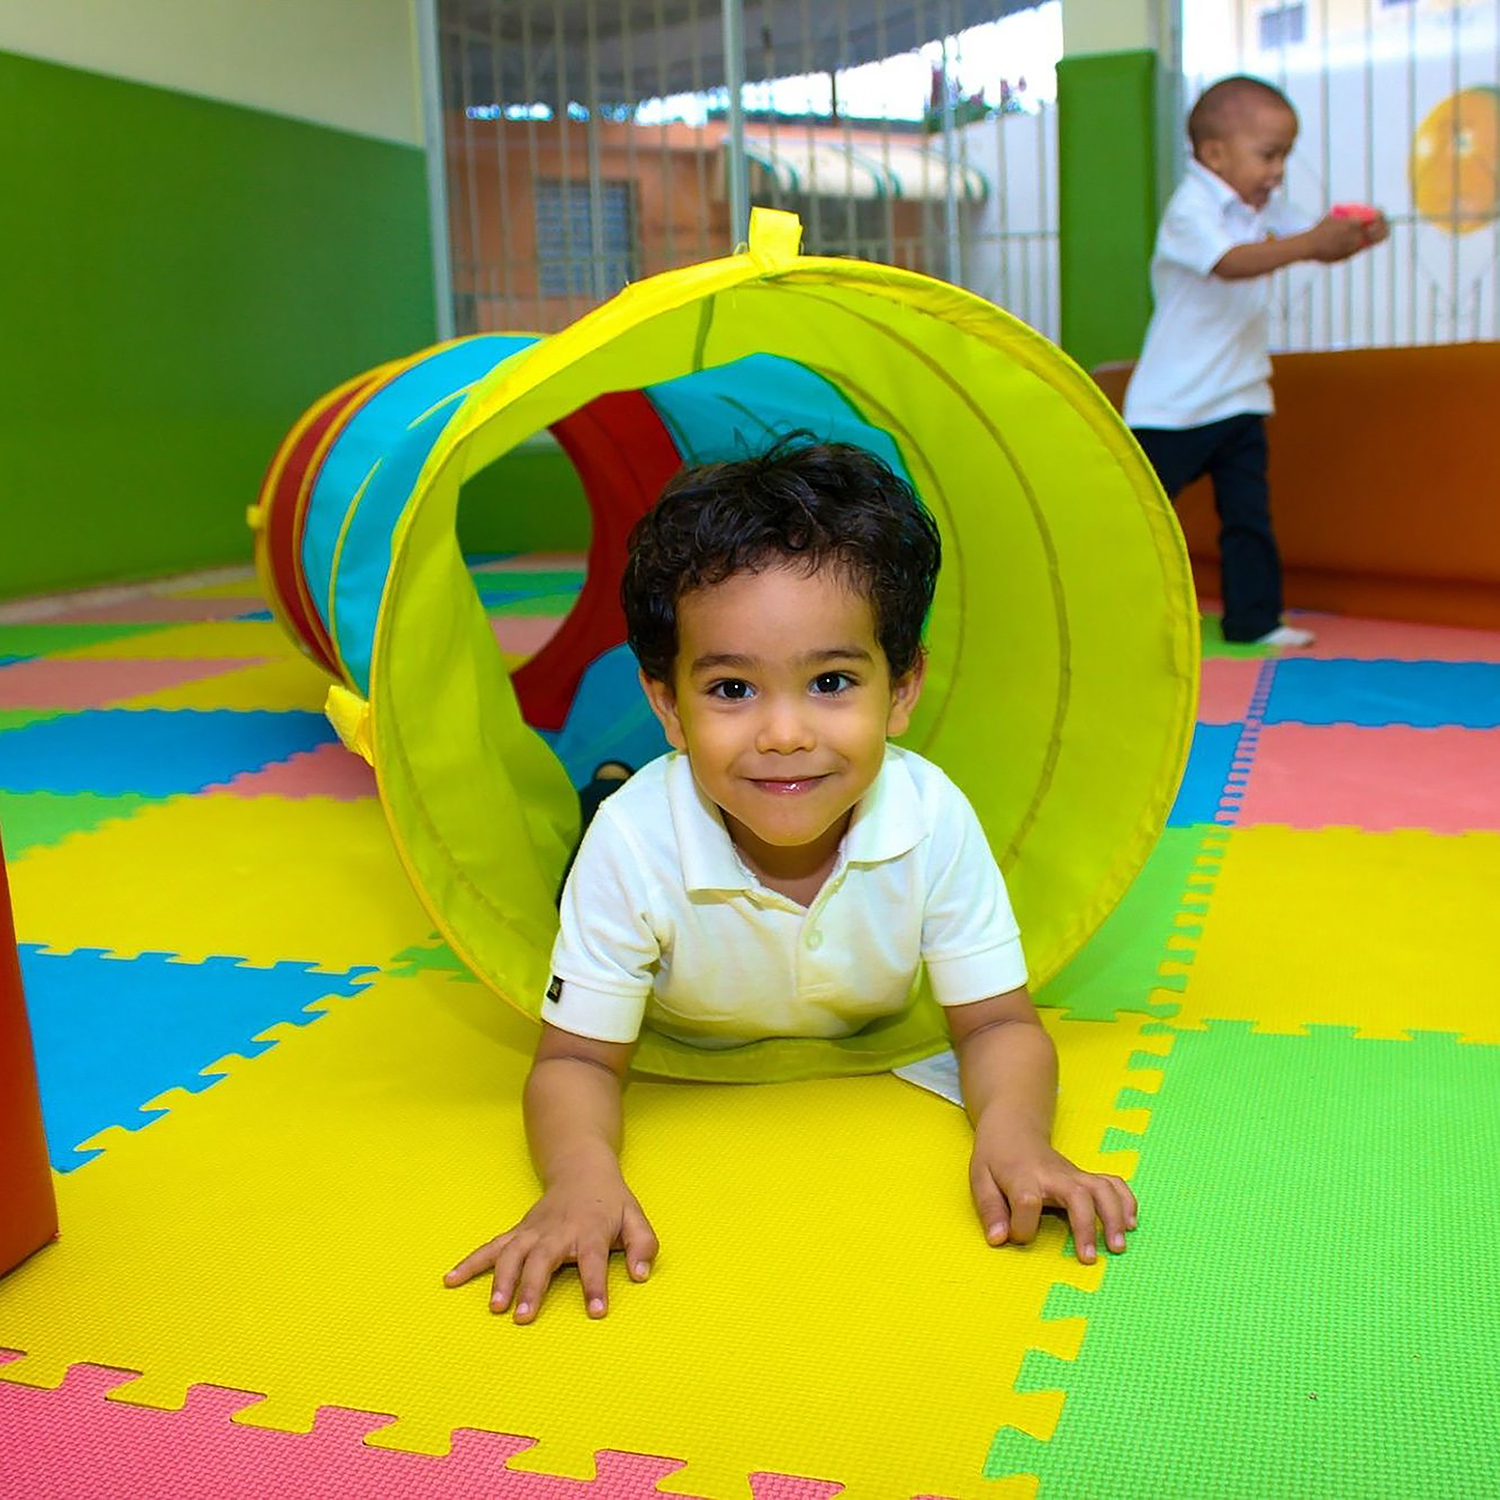 A young child crawls through a tube as other children play in the background indoors.